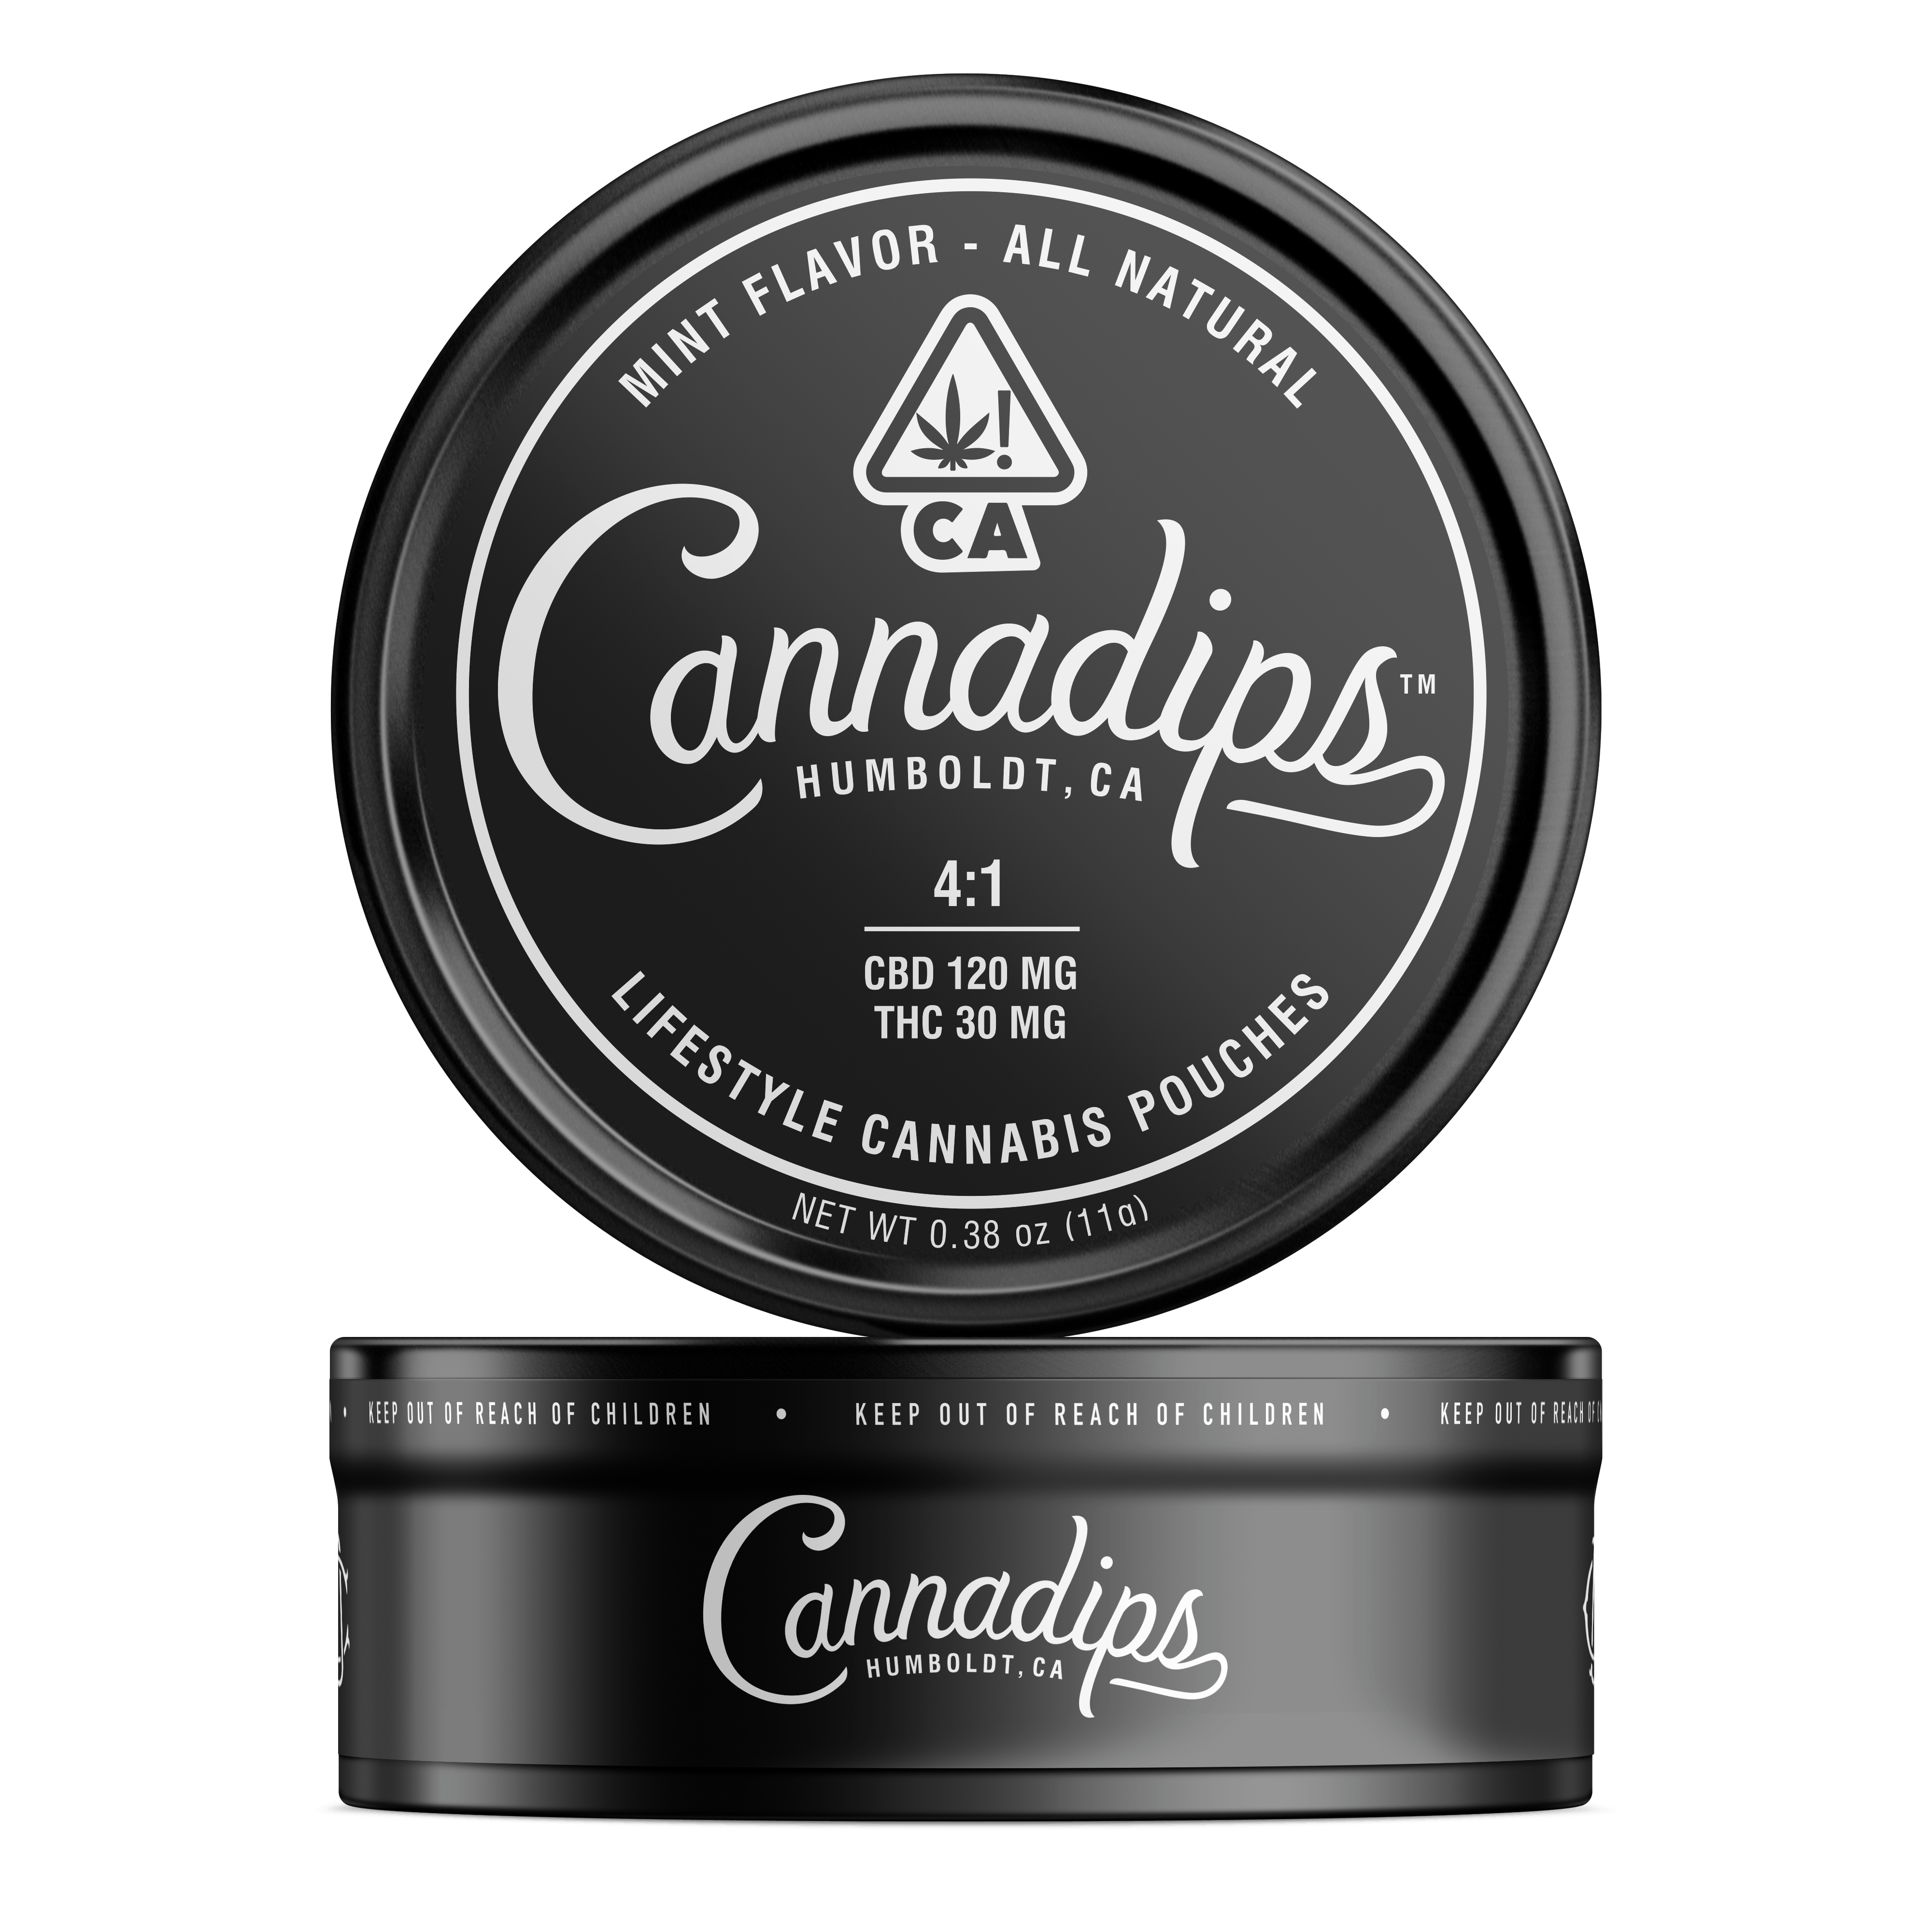 concentrate-cannadips-cannadips-mint-41-pouches-cbd-2c-mirco-dose-tin